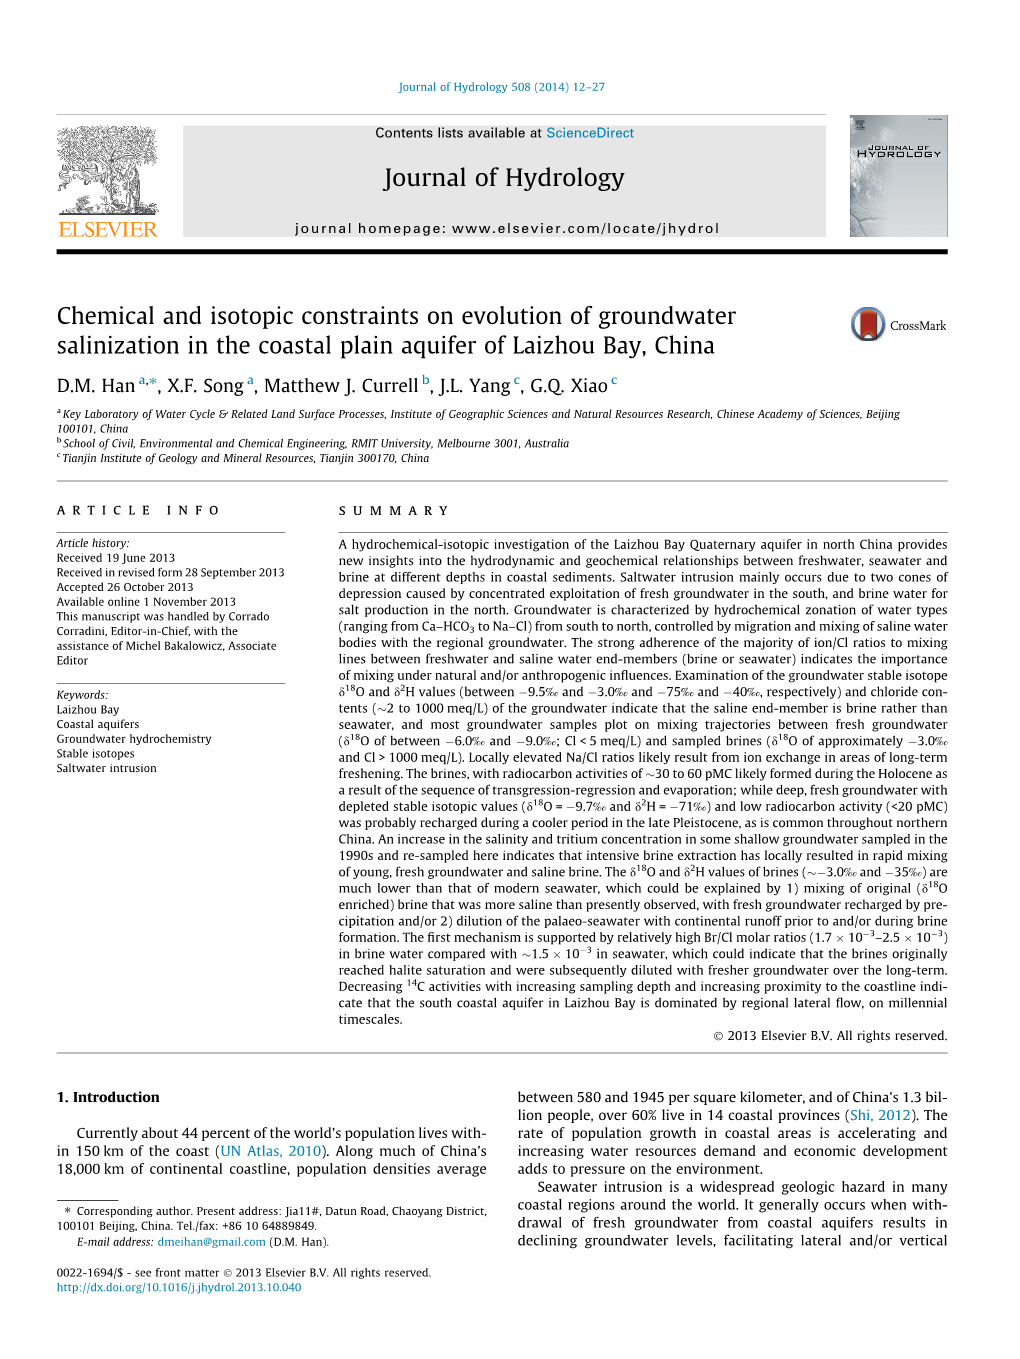 Chemical and Isotopic Constraints on Evolution of Groundwater Salinization in the Coastal Plain Aquifer of Laizhou Bay, China ⇑ D.M